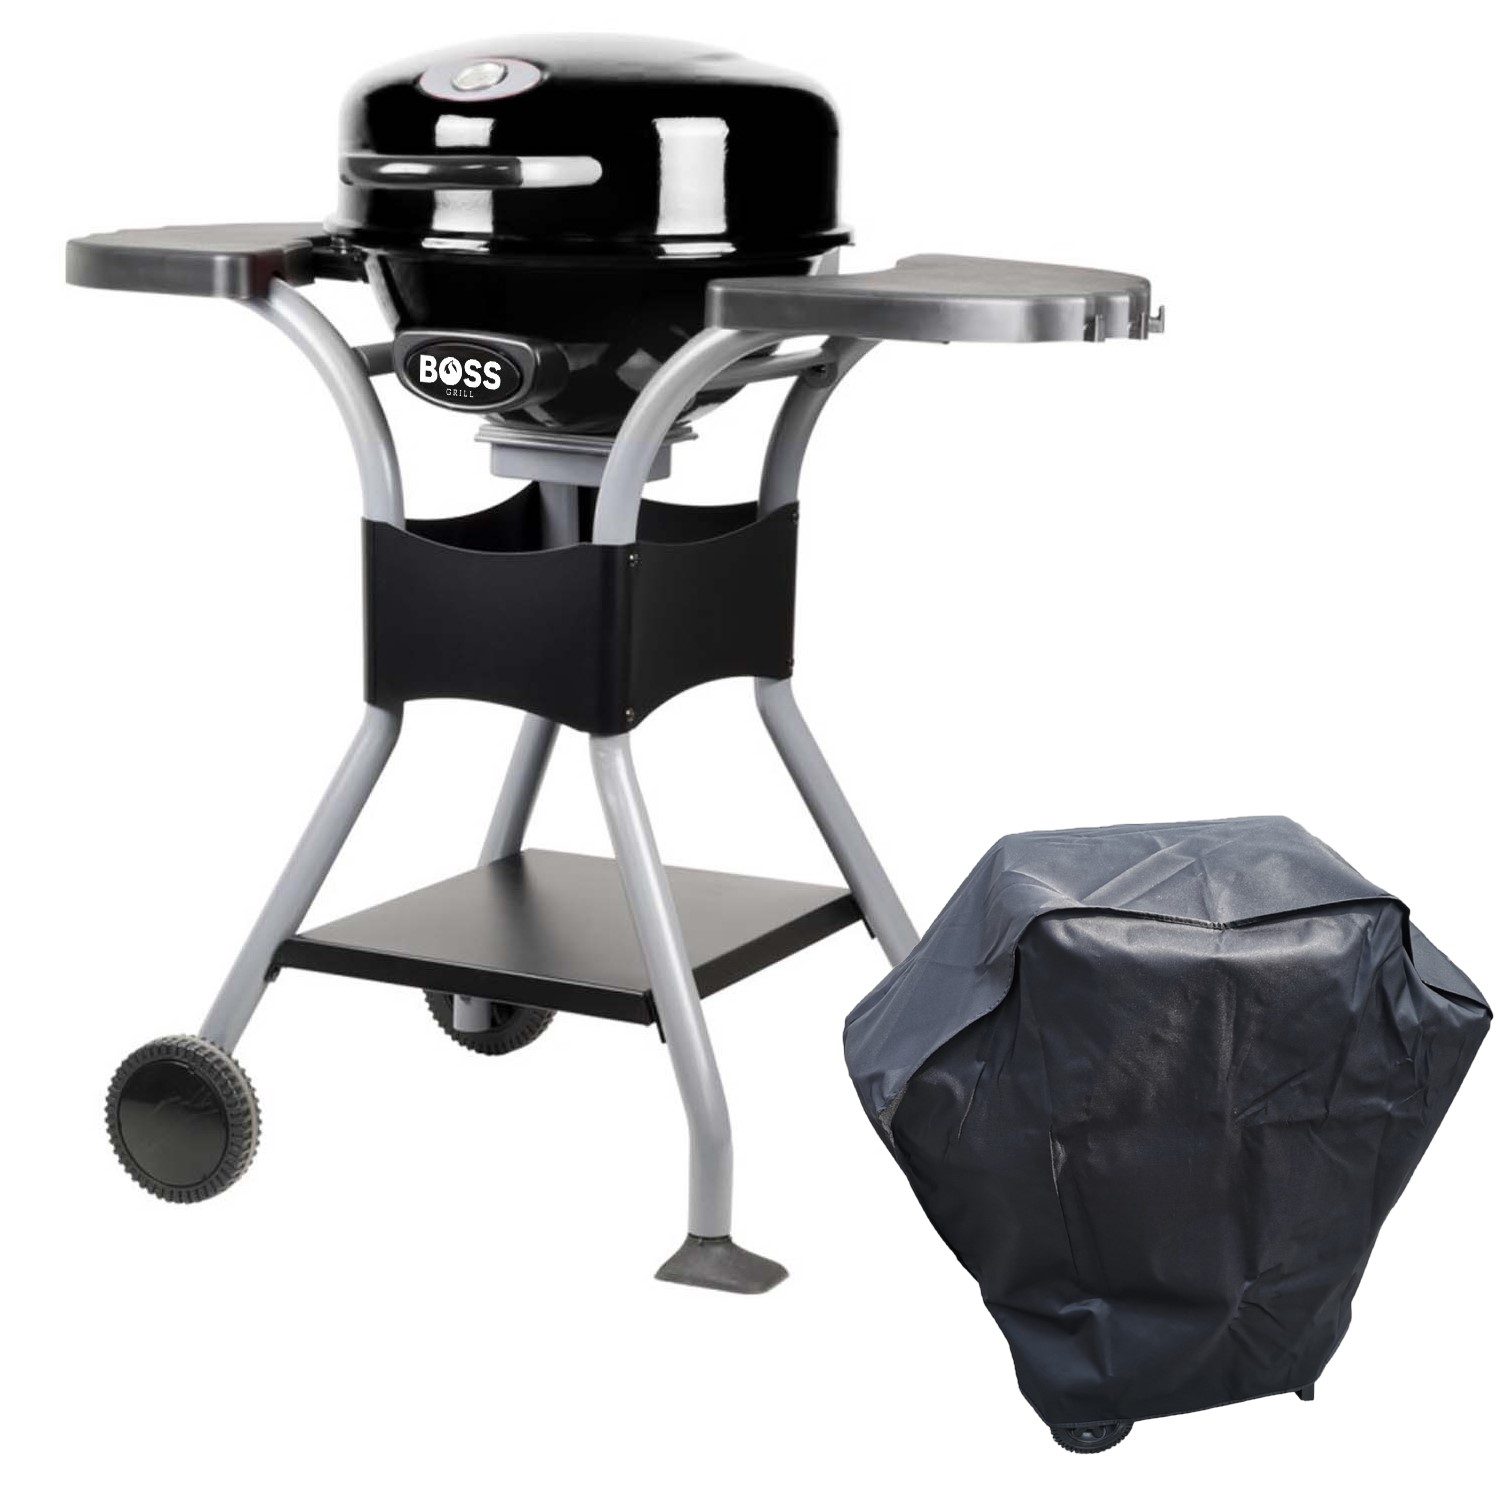 Boss Grill Compact Outdoor Electric BBQ Grill With Cover - Black